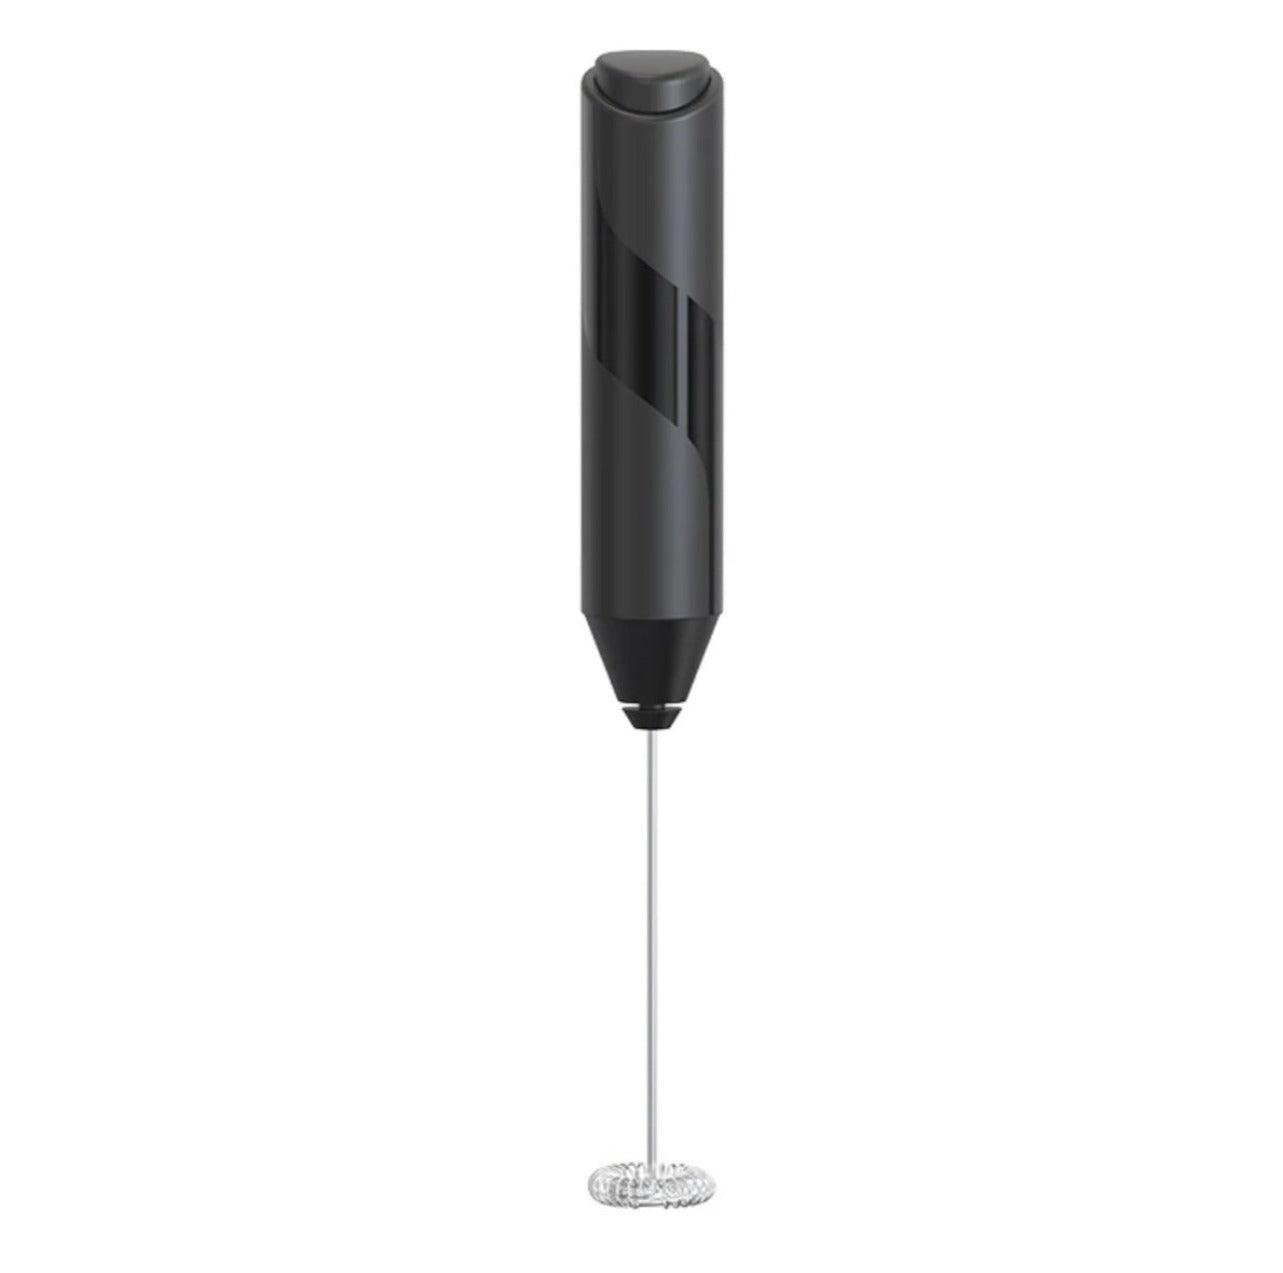 Handheld Electric Milk Frother - Expat Life Style